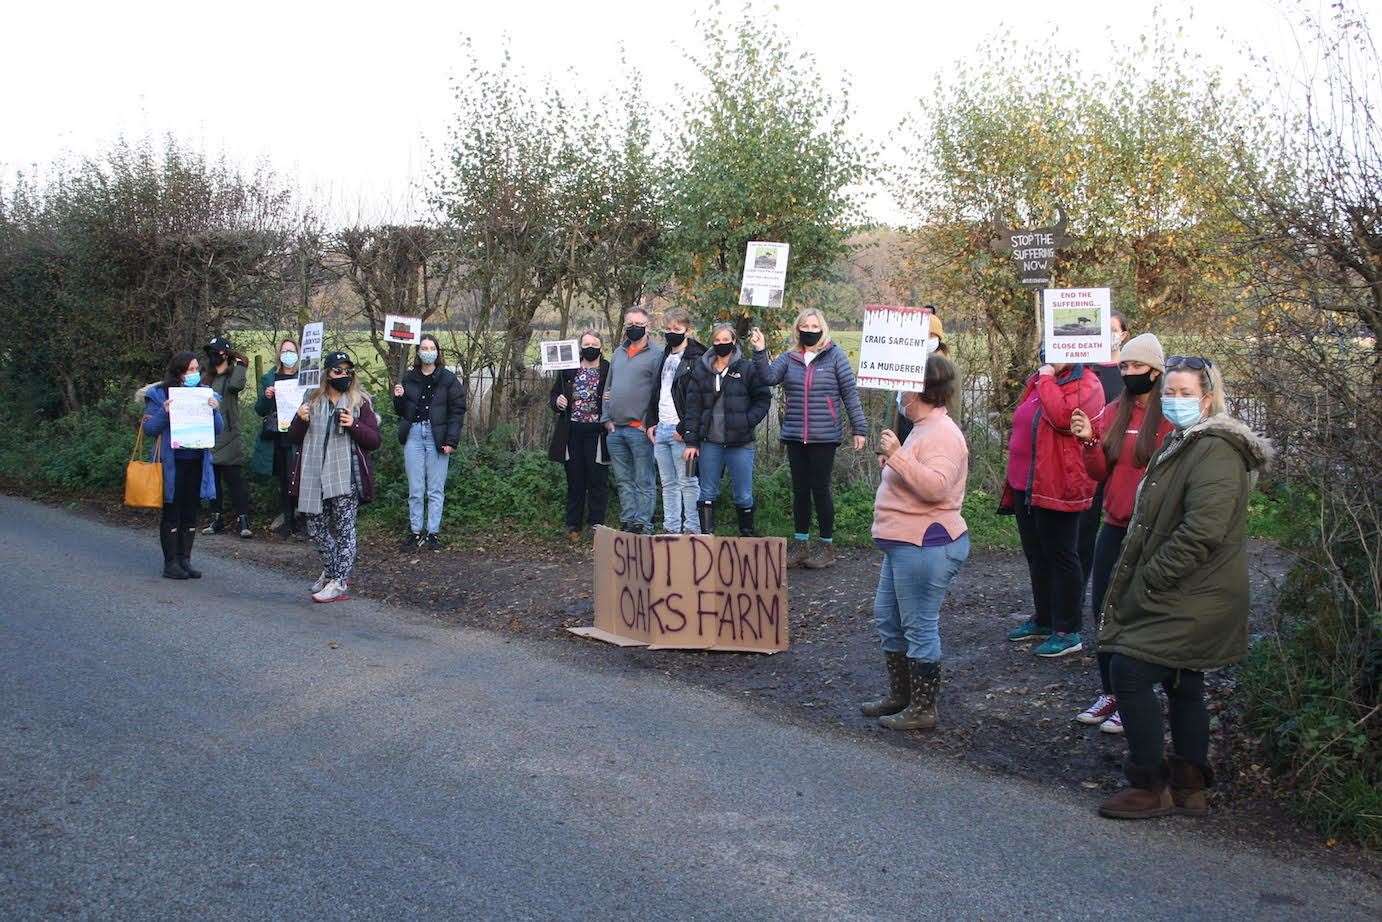 Protesters outside The Oaks Farm owned by Craig Sargent in Halstead